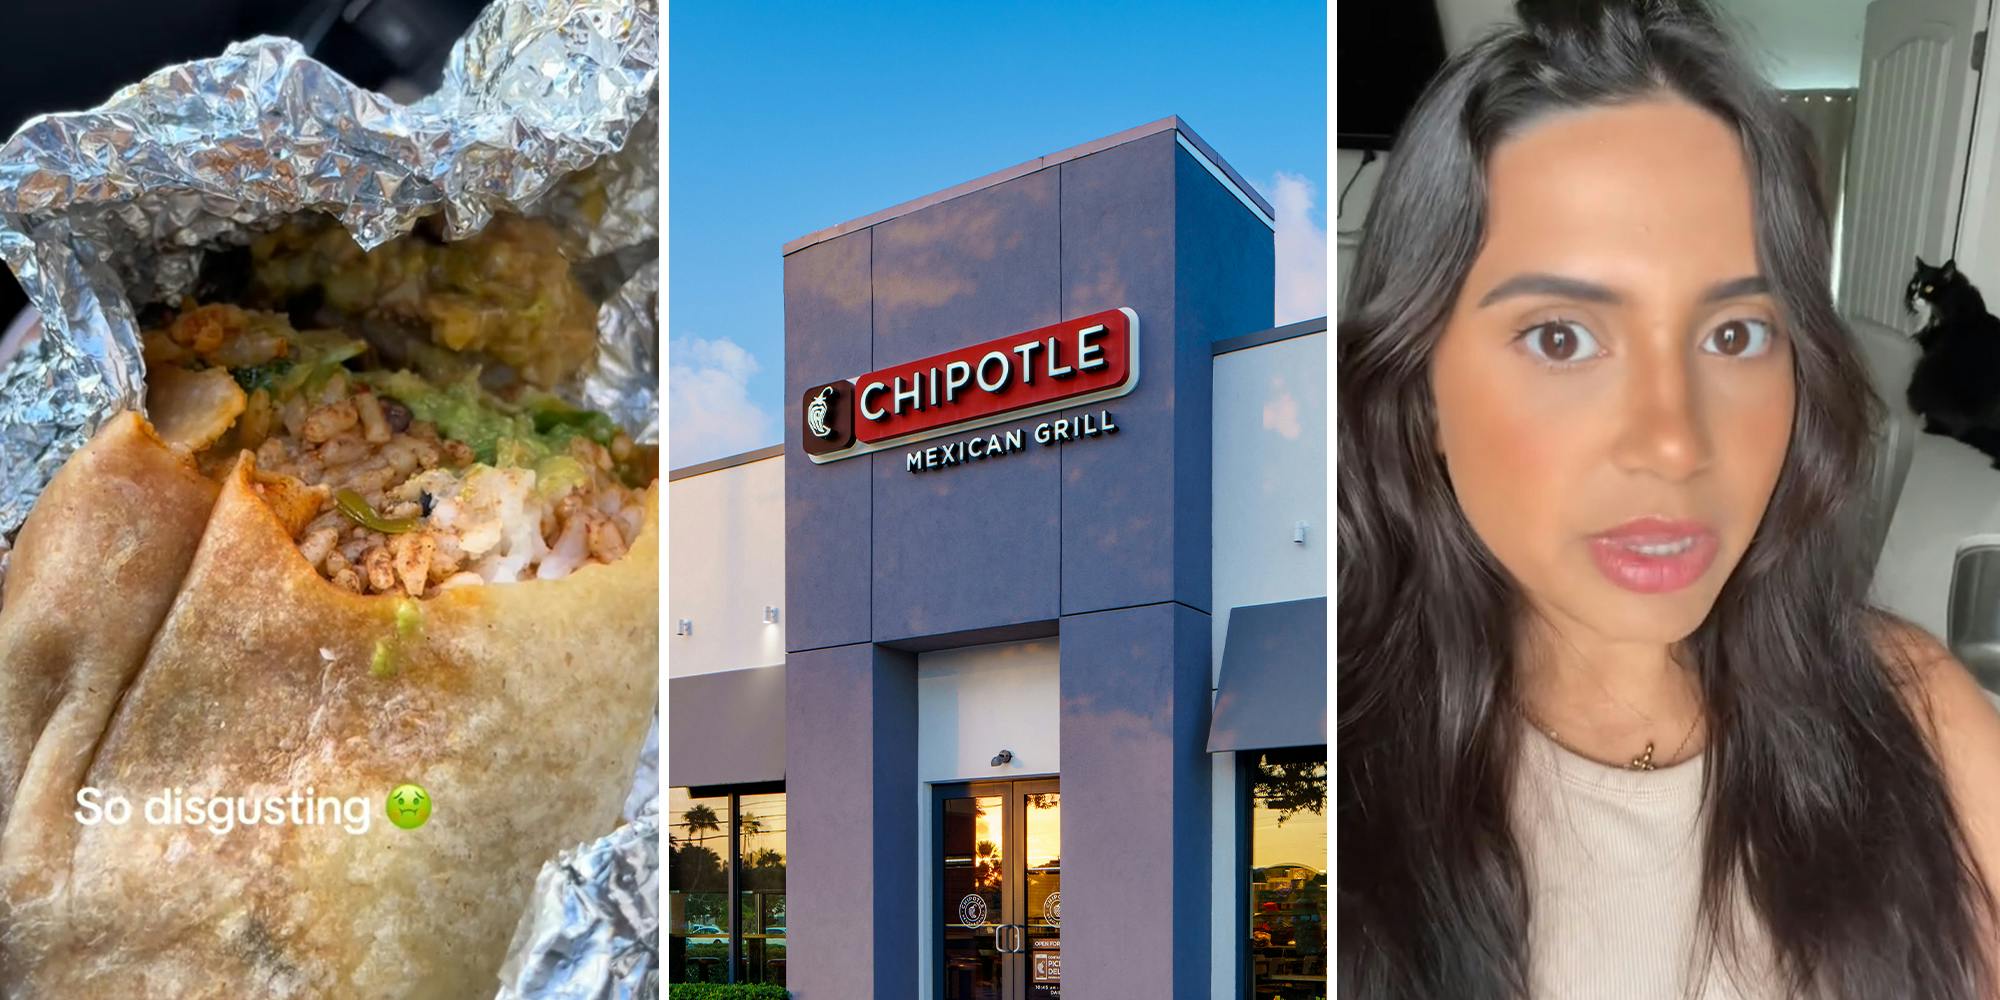 ‘I’m so scared to get Chipotle now’: Customer finds something ‘disgusting’ in her Chipotle burrito. She’s not the only one